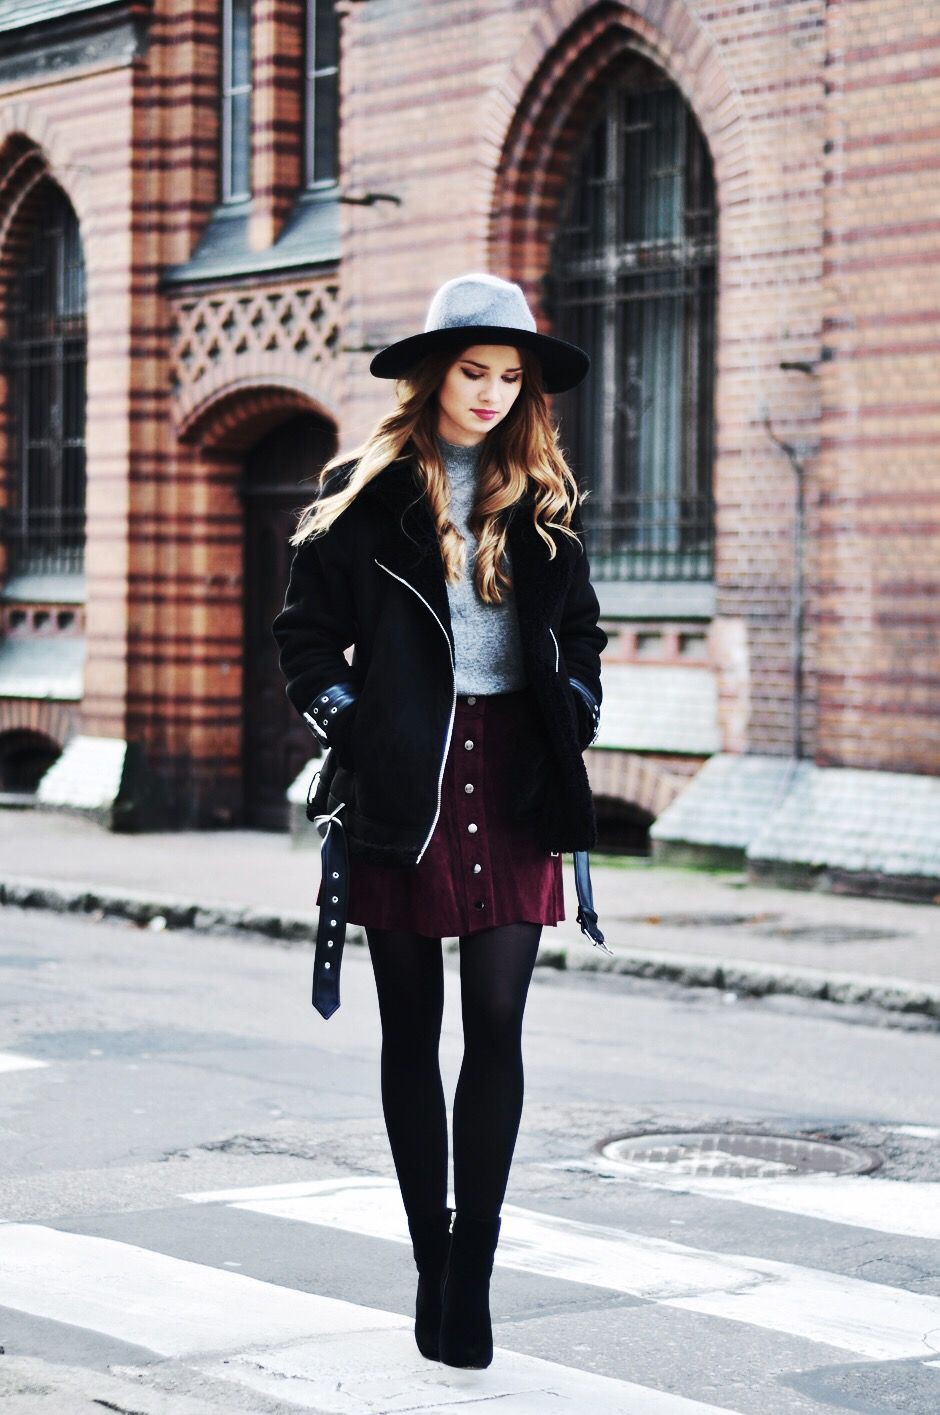 Cute Winter Outfits Skirt, Winter Clothing F81